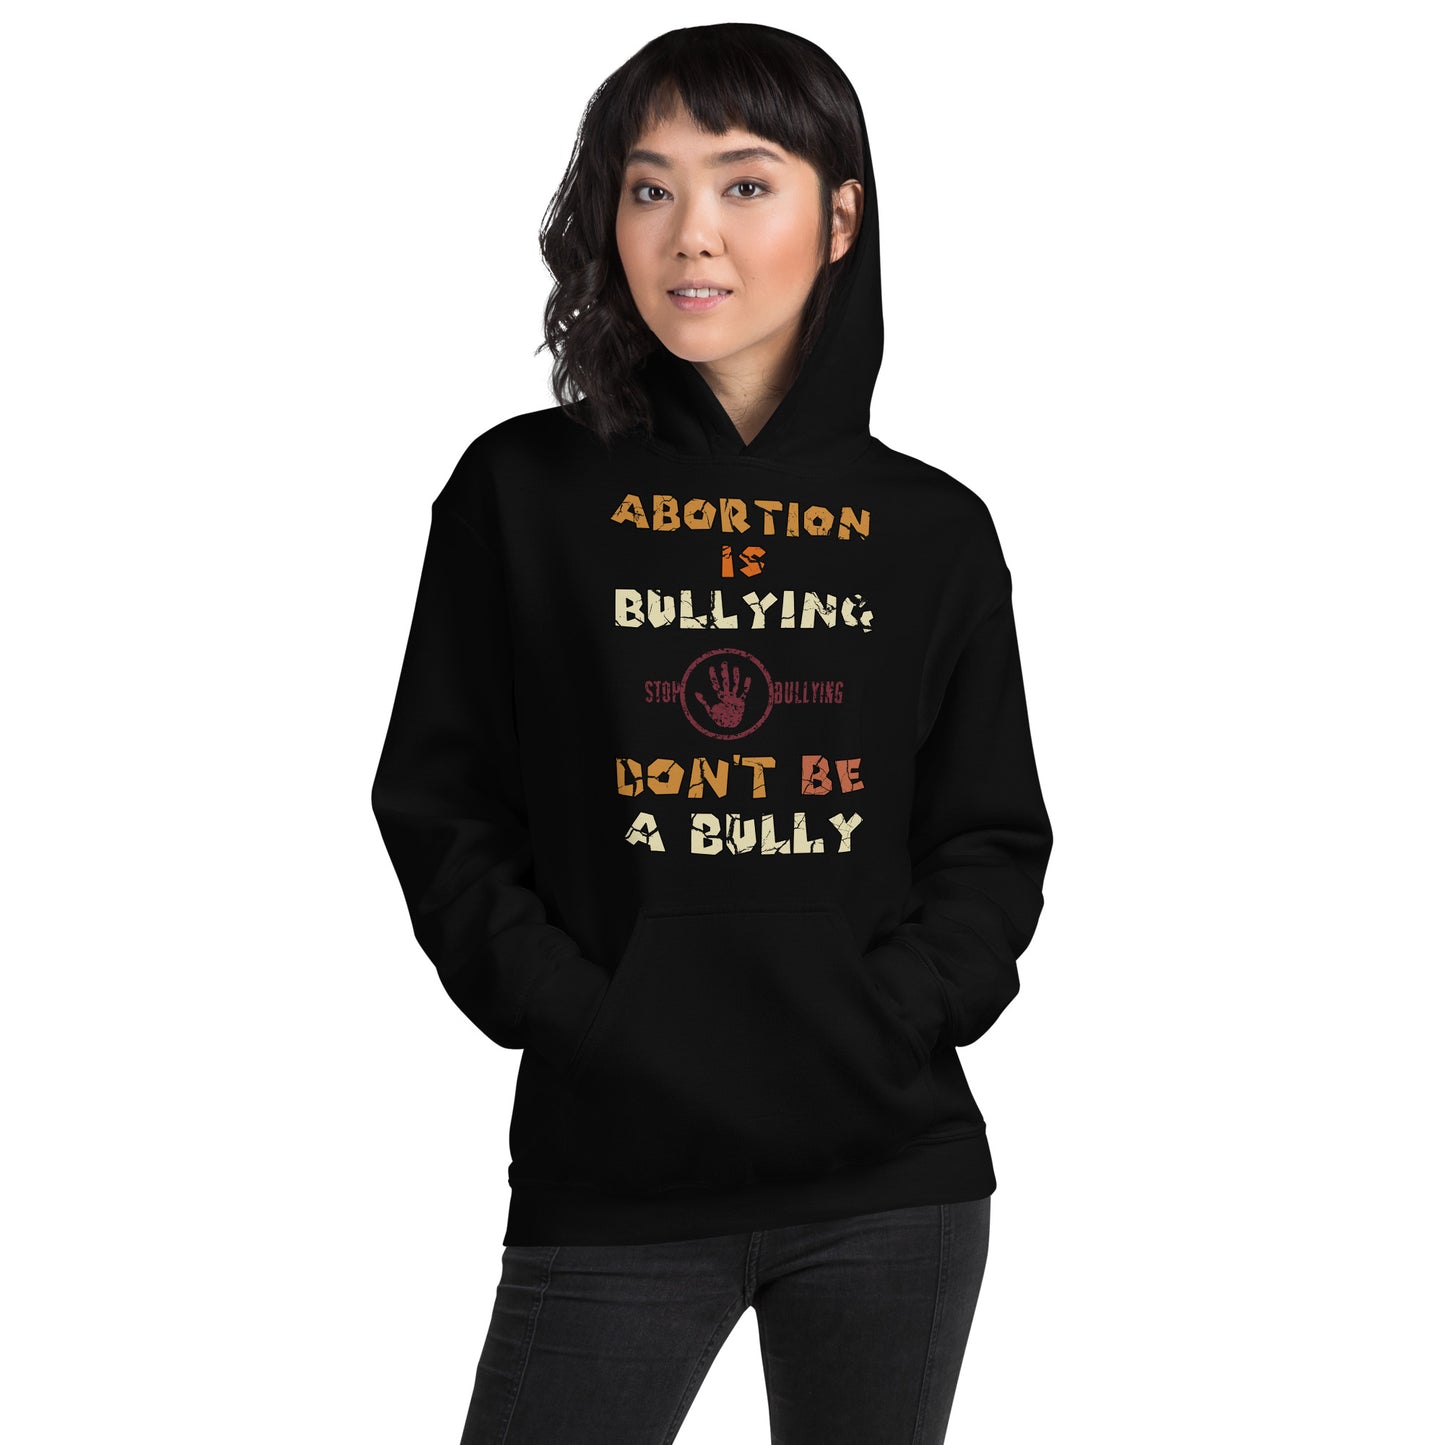 A001 Hoodie – Gildan 18500 Unisex Hoodie Featuring Stop-Hand Graphic with text “Abortion is Bullying. Don’t be a Bully.”